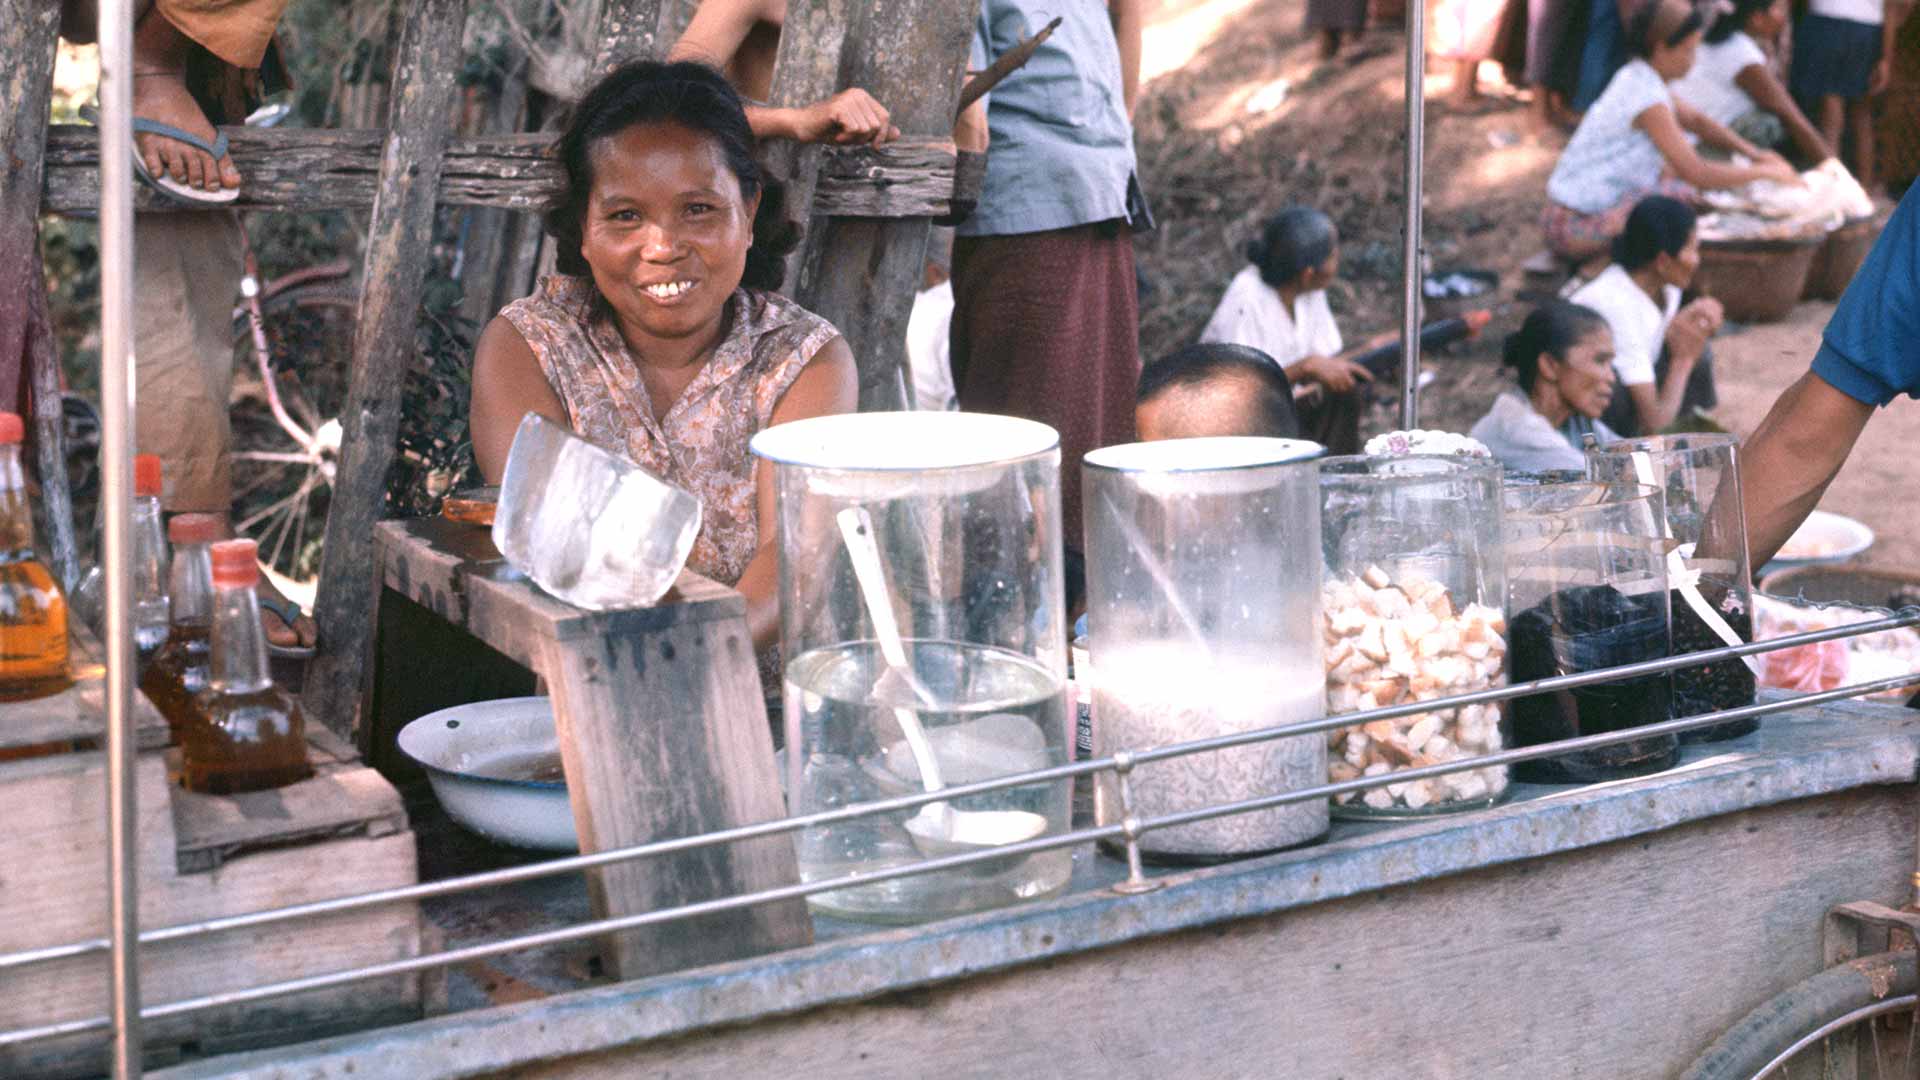 A girl sits behind good for sale at a food cart.